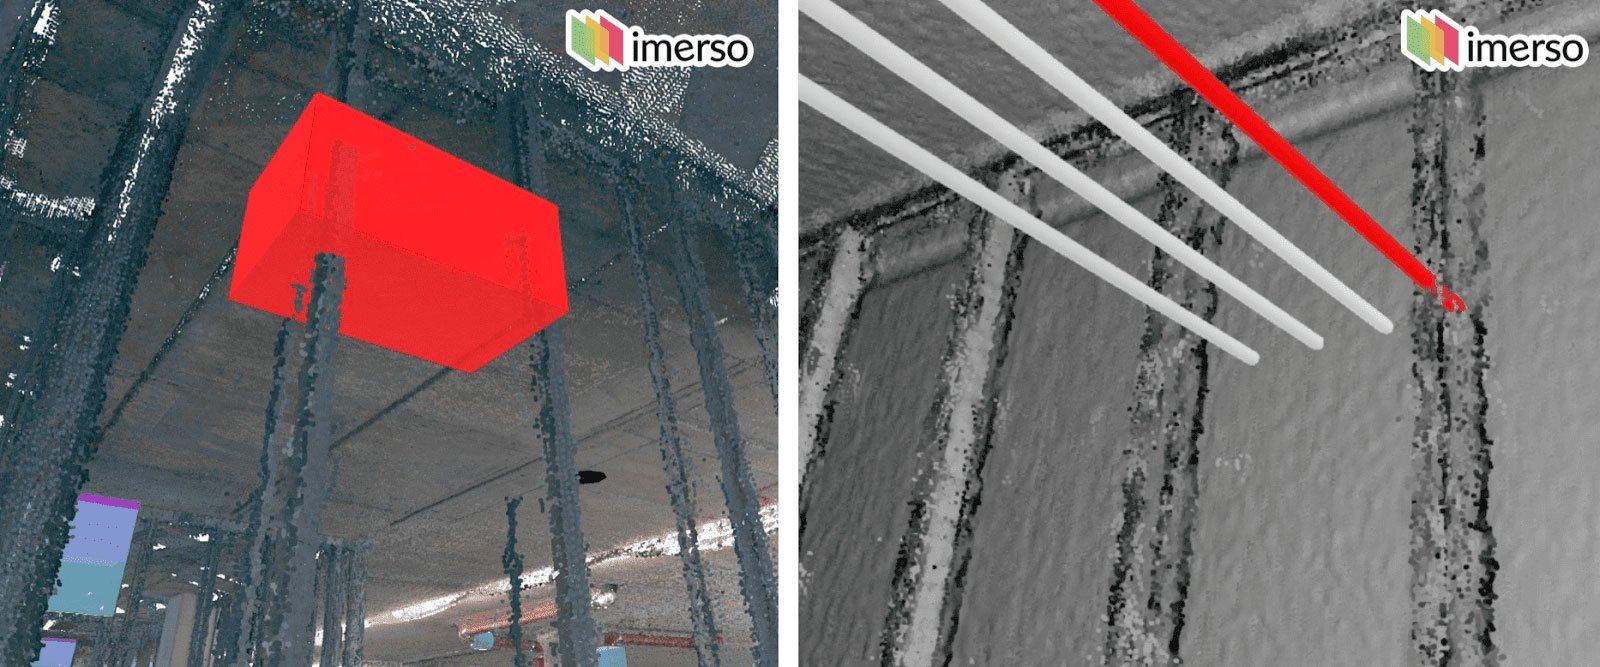 The scariest construction stories, Spooky Fire-Stopping Secrets by Imerso.